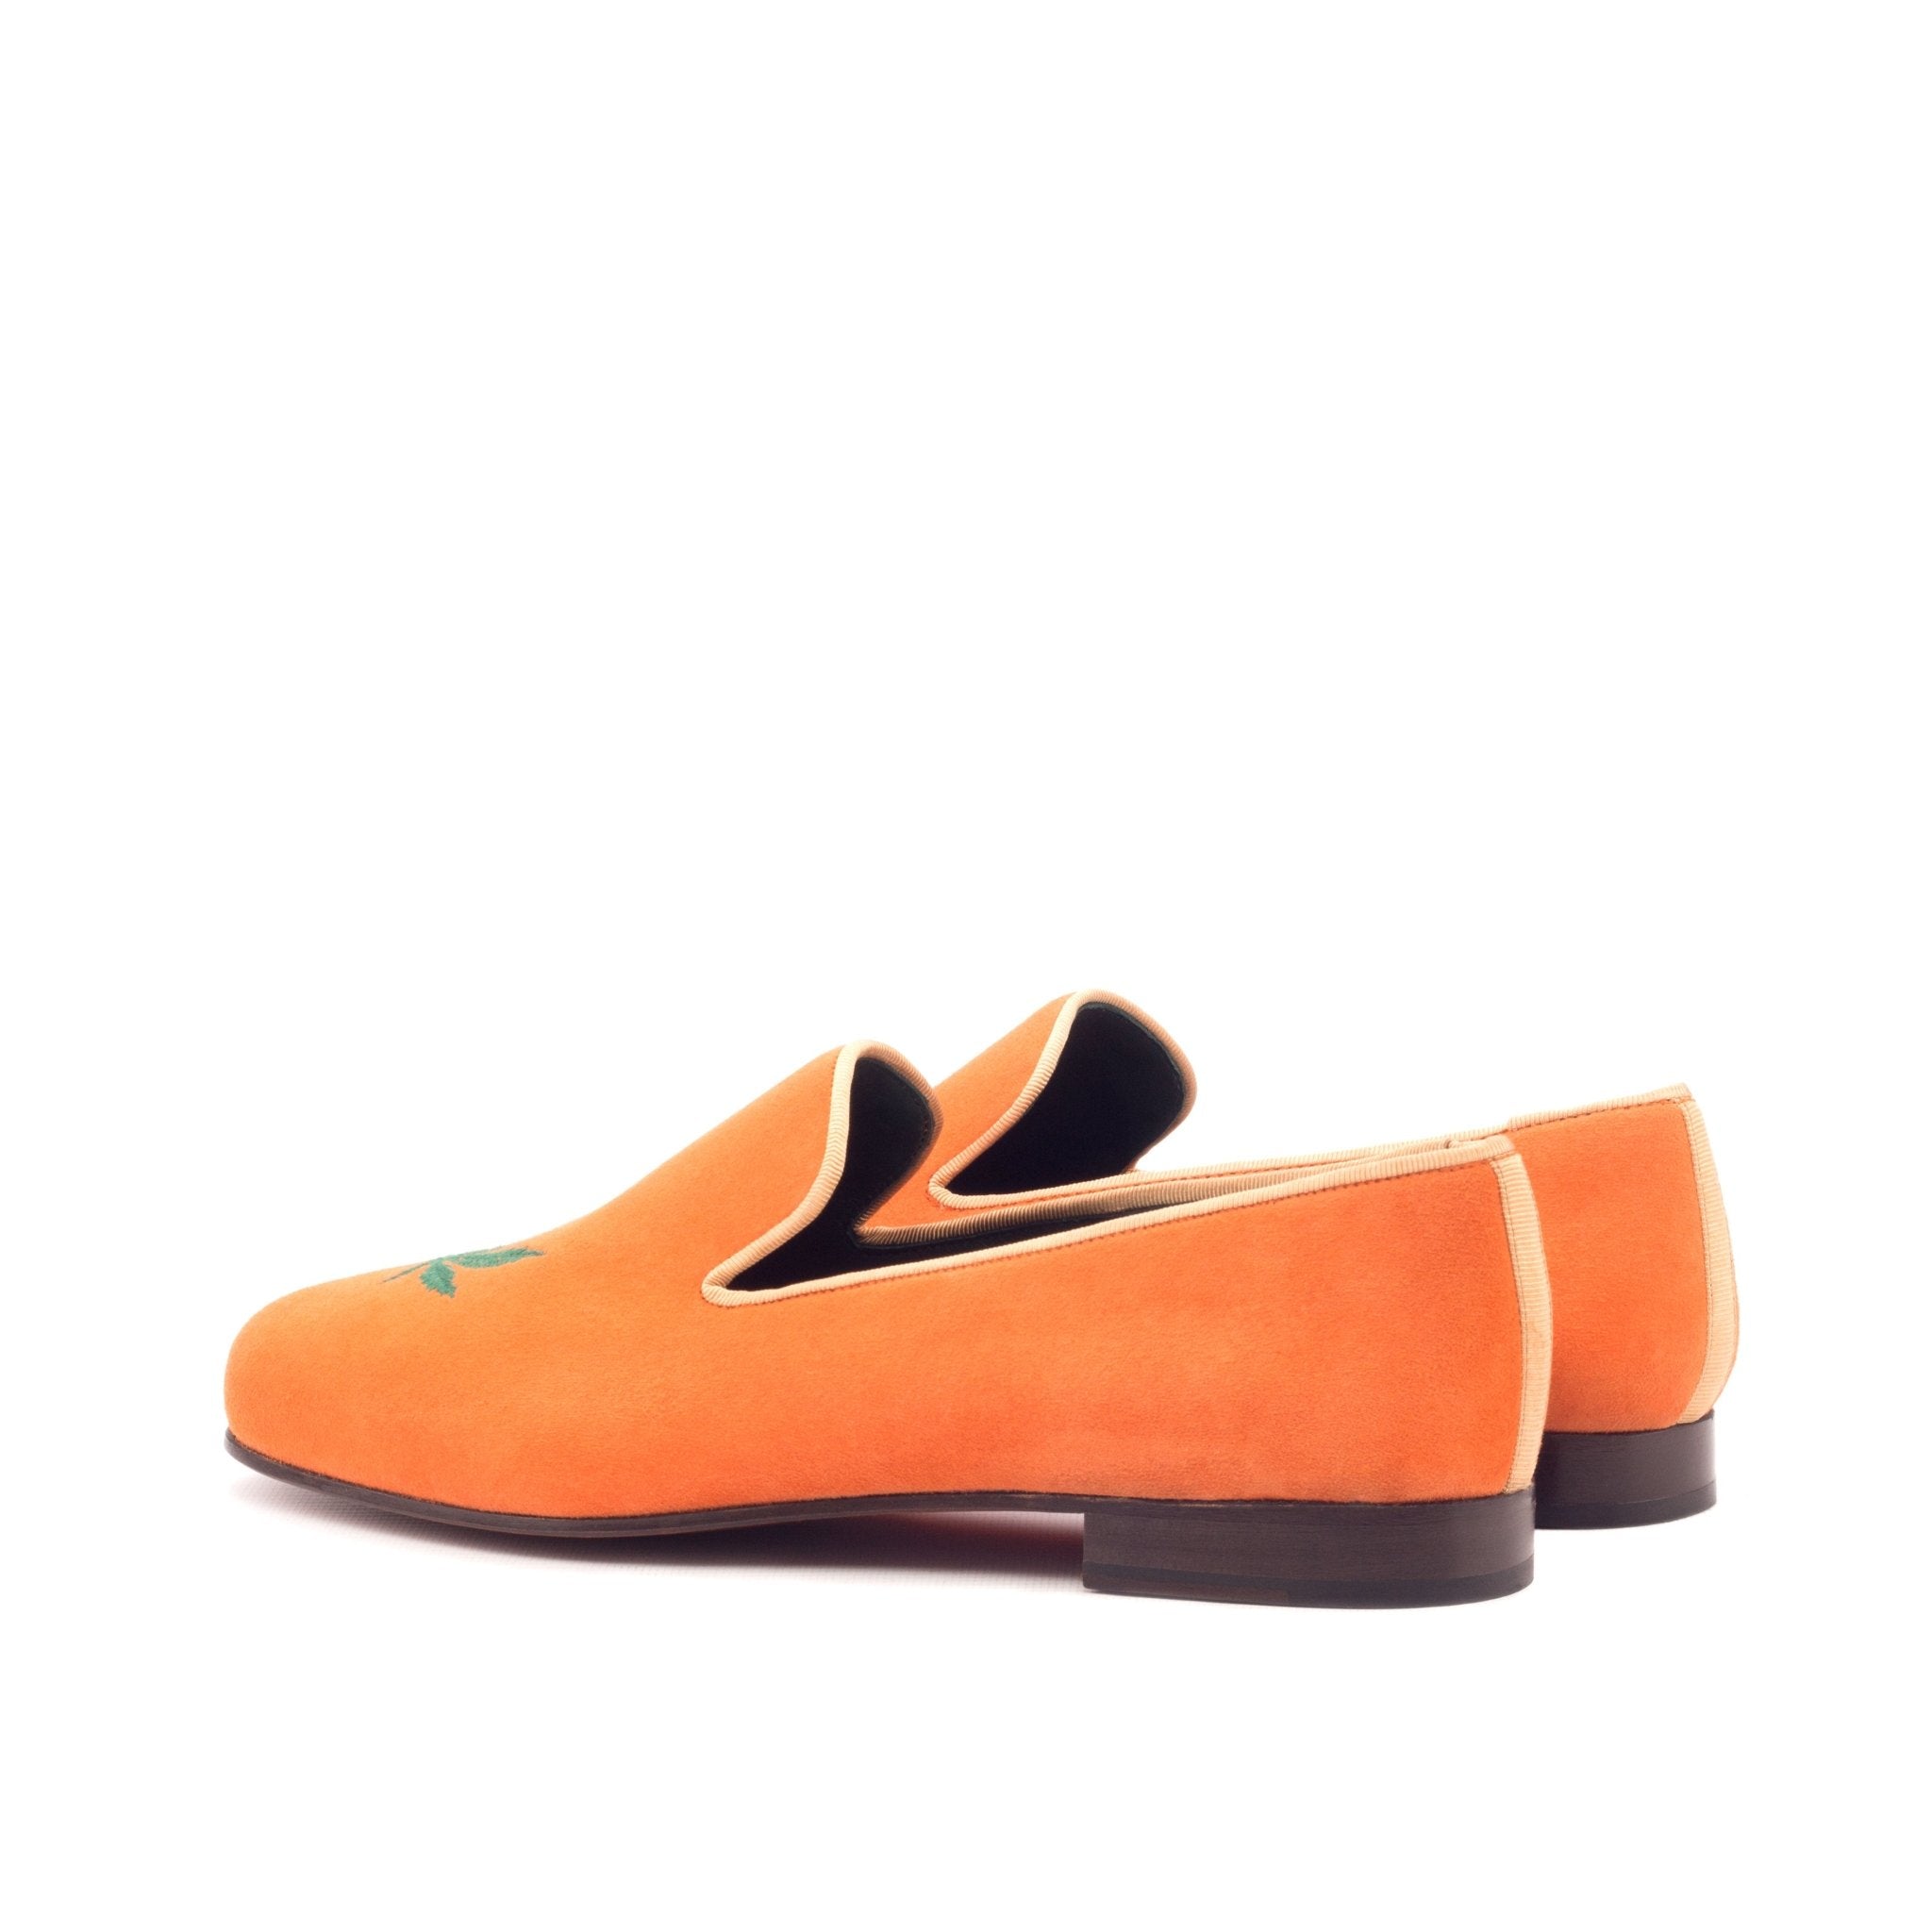 Men's Ronde Orange Toker Smoking Slippers with Embroidery - Maison de Kingsley Couture Harmonie et Fureur Spain